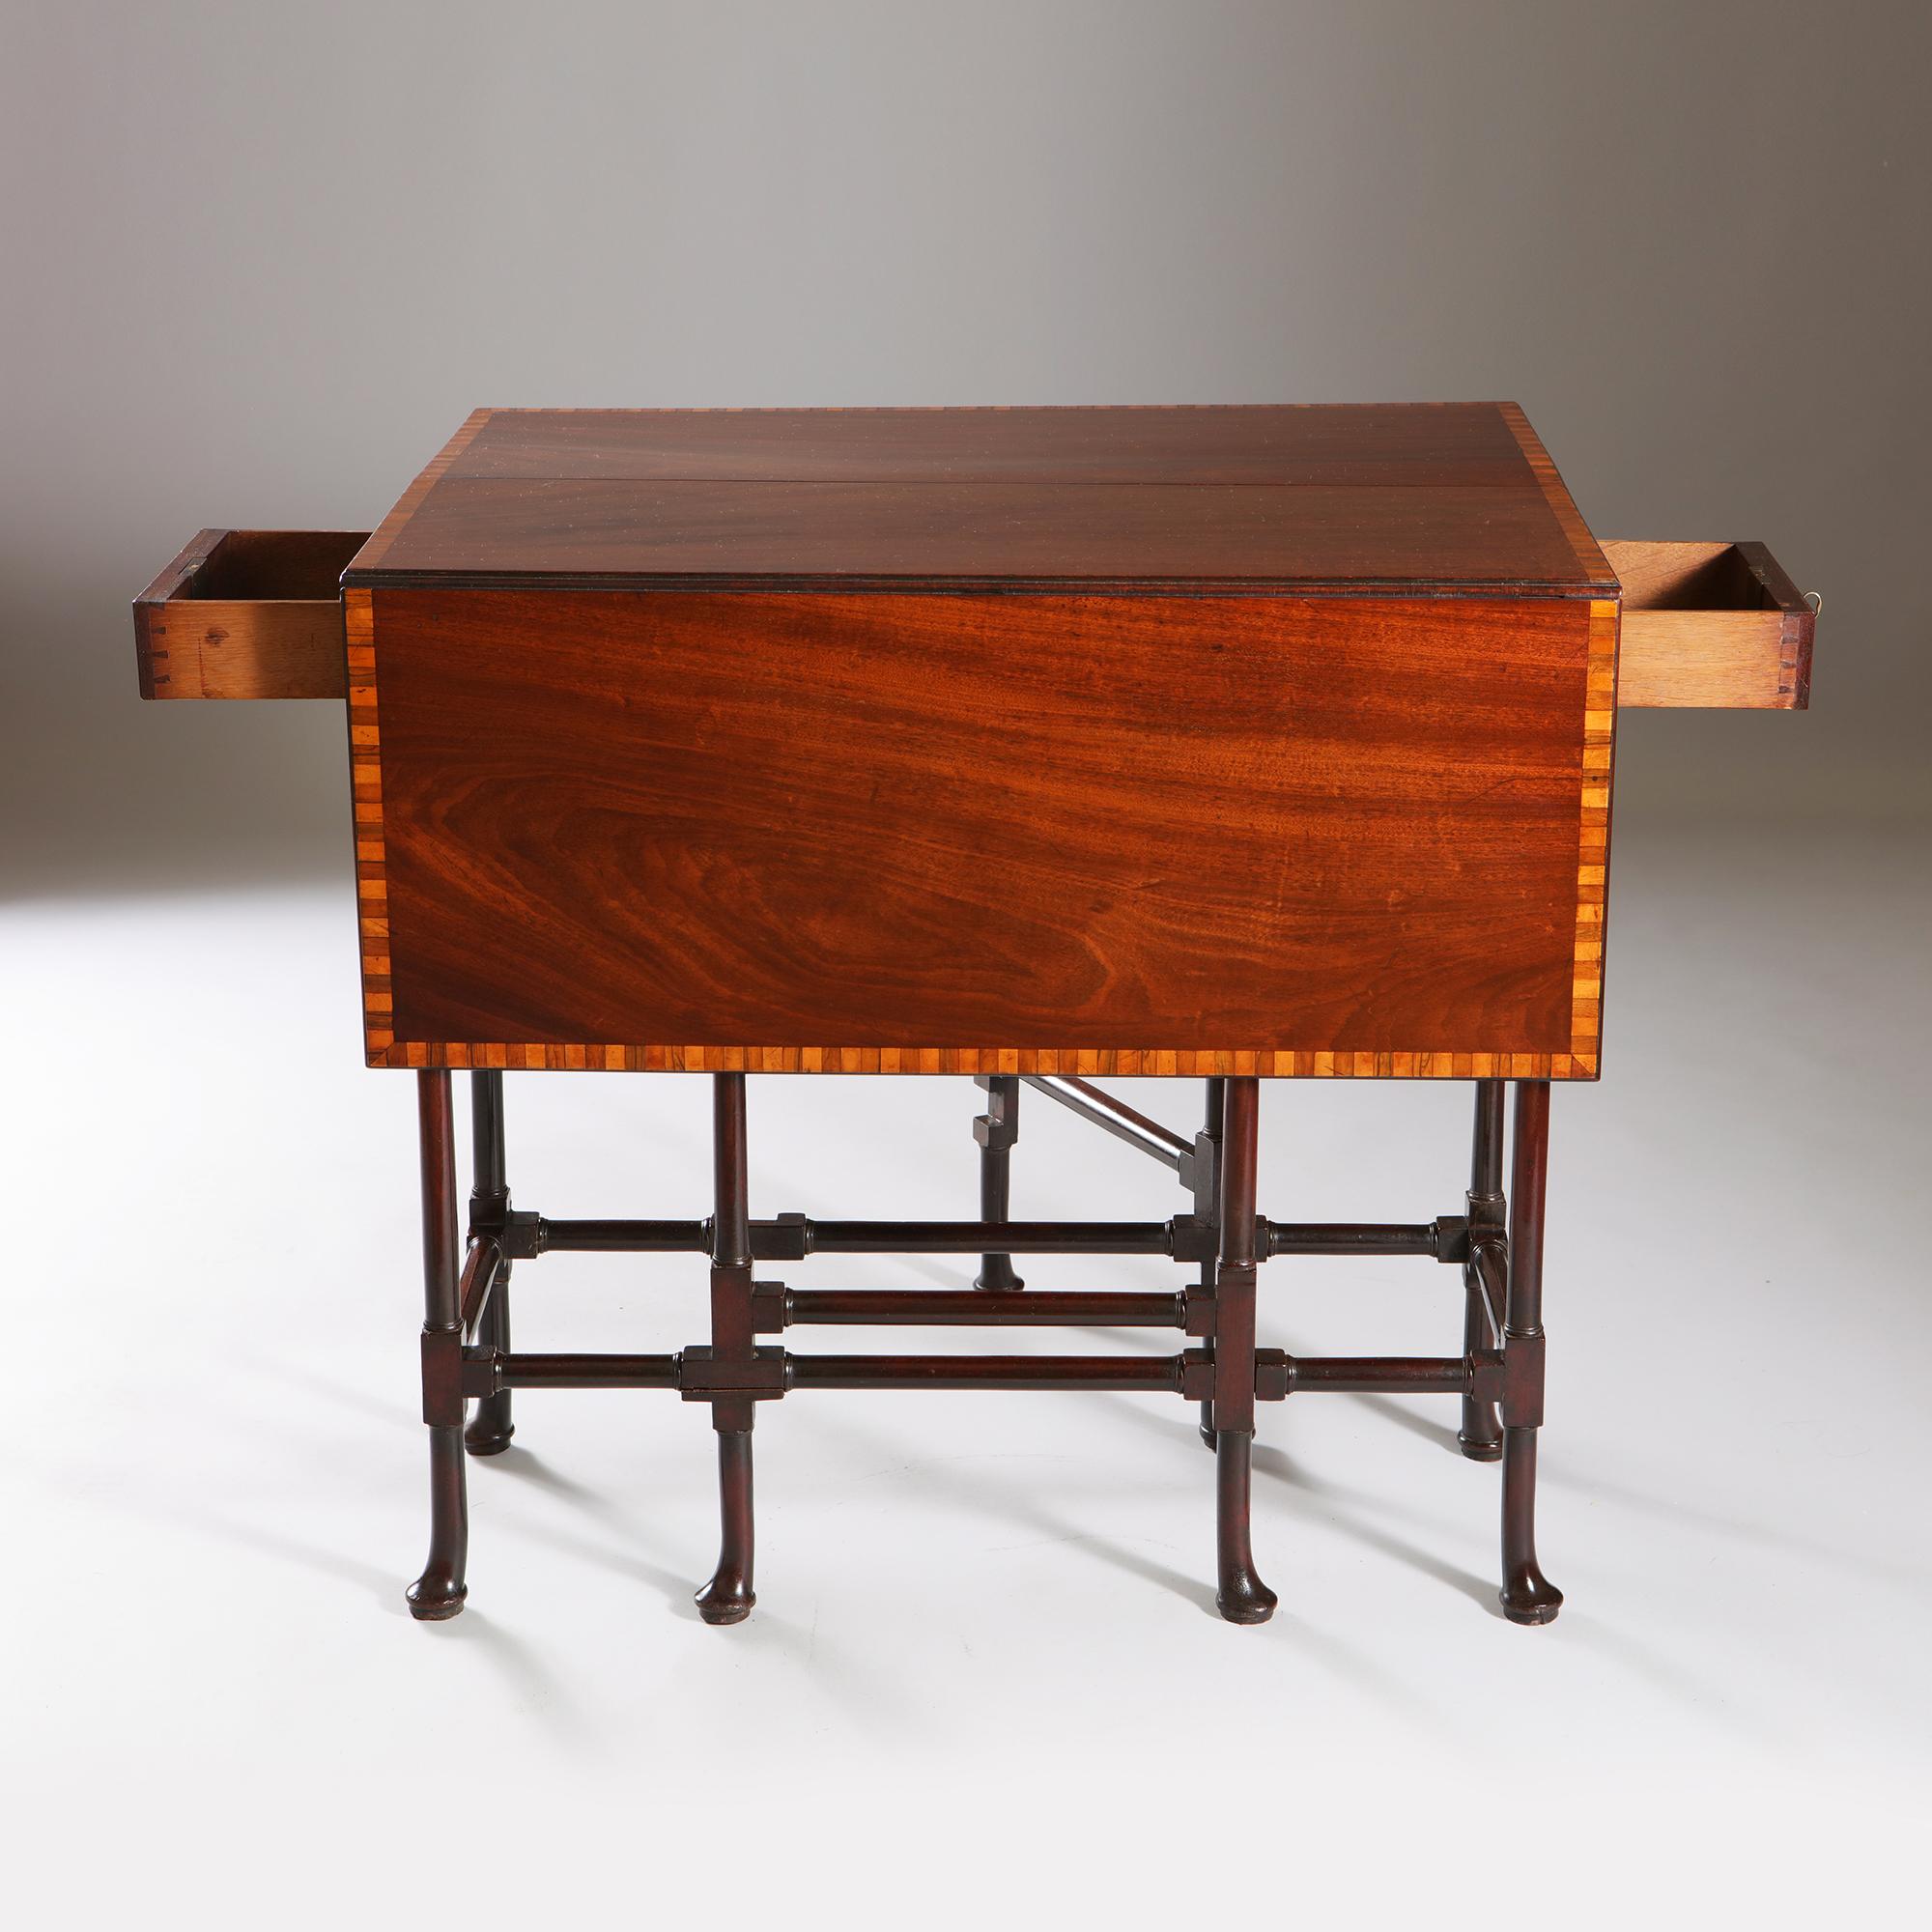 A George III mahogany spider-leg table attributed to Thomas Chippendale 1768 For Sale 1